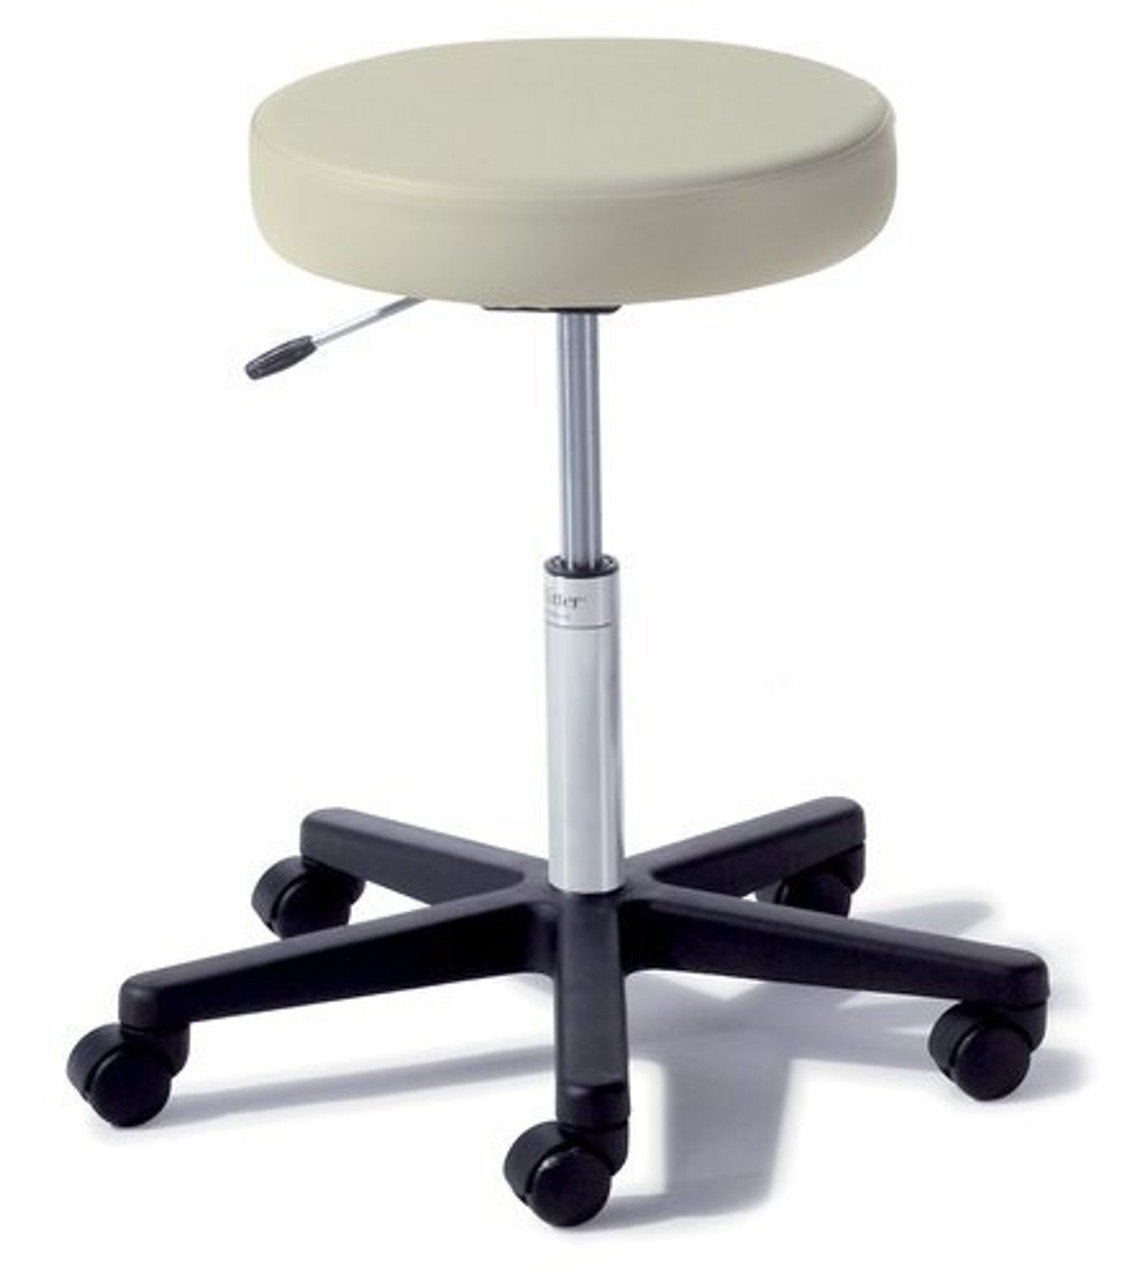 STOOL PHYSICIAN AIR LIFT 5-CASTER** BLK BASE/BLUEBERRY UPH 144-272-001-235